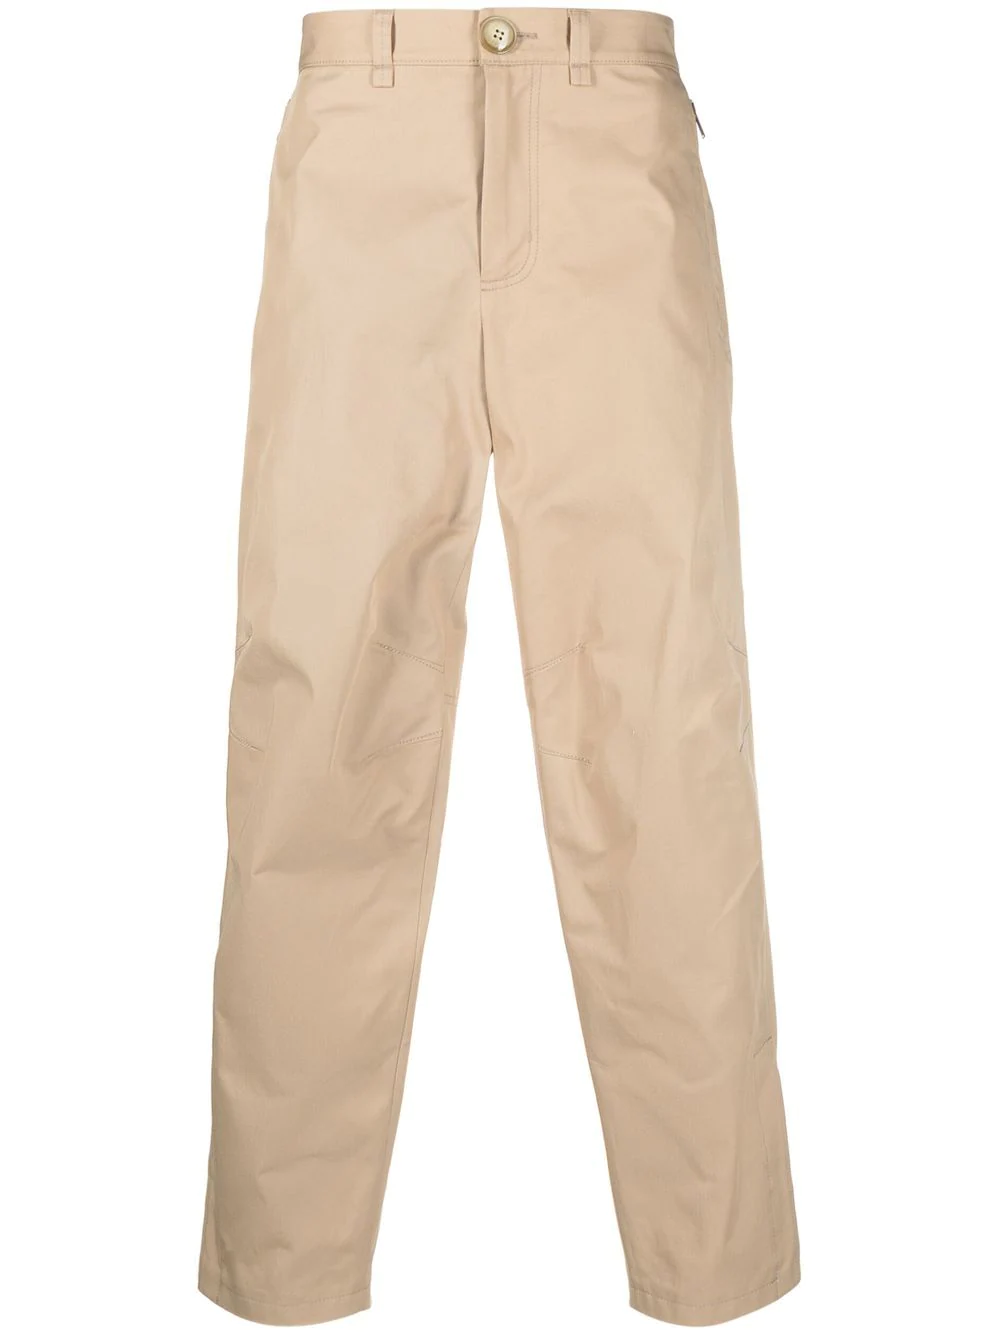 LANVIN STRAIGHT LEG TROUSERS WITH ANKLE ZIPS